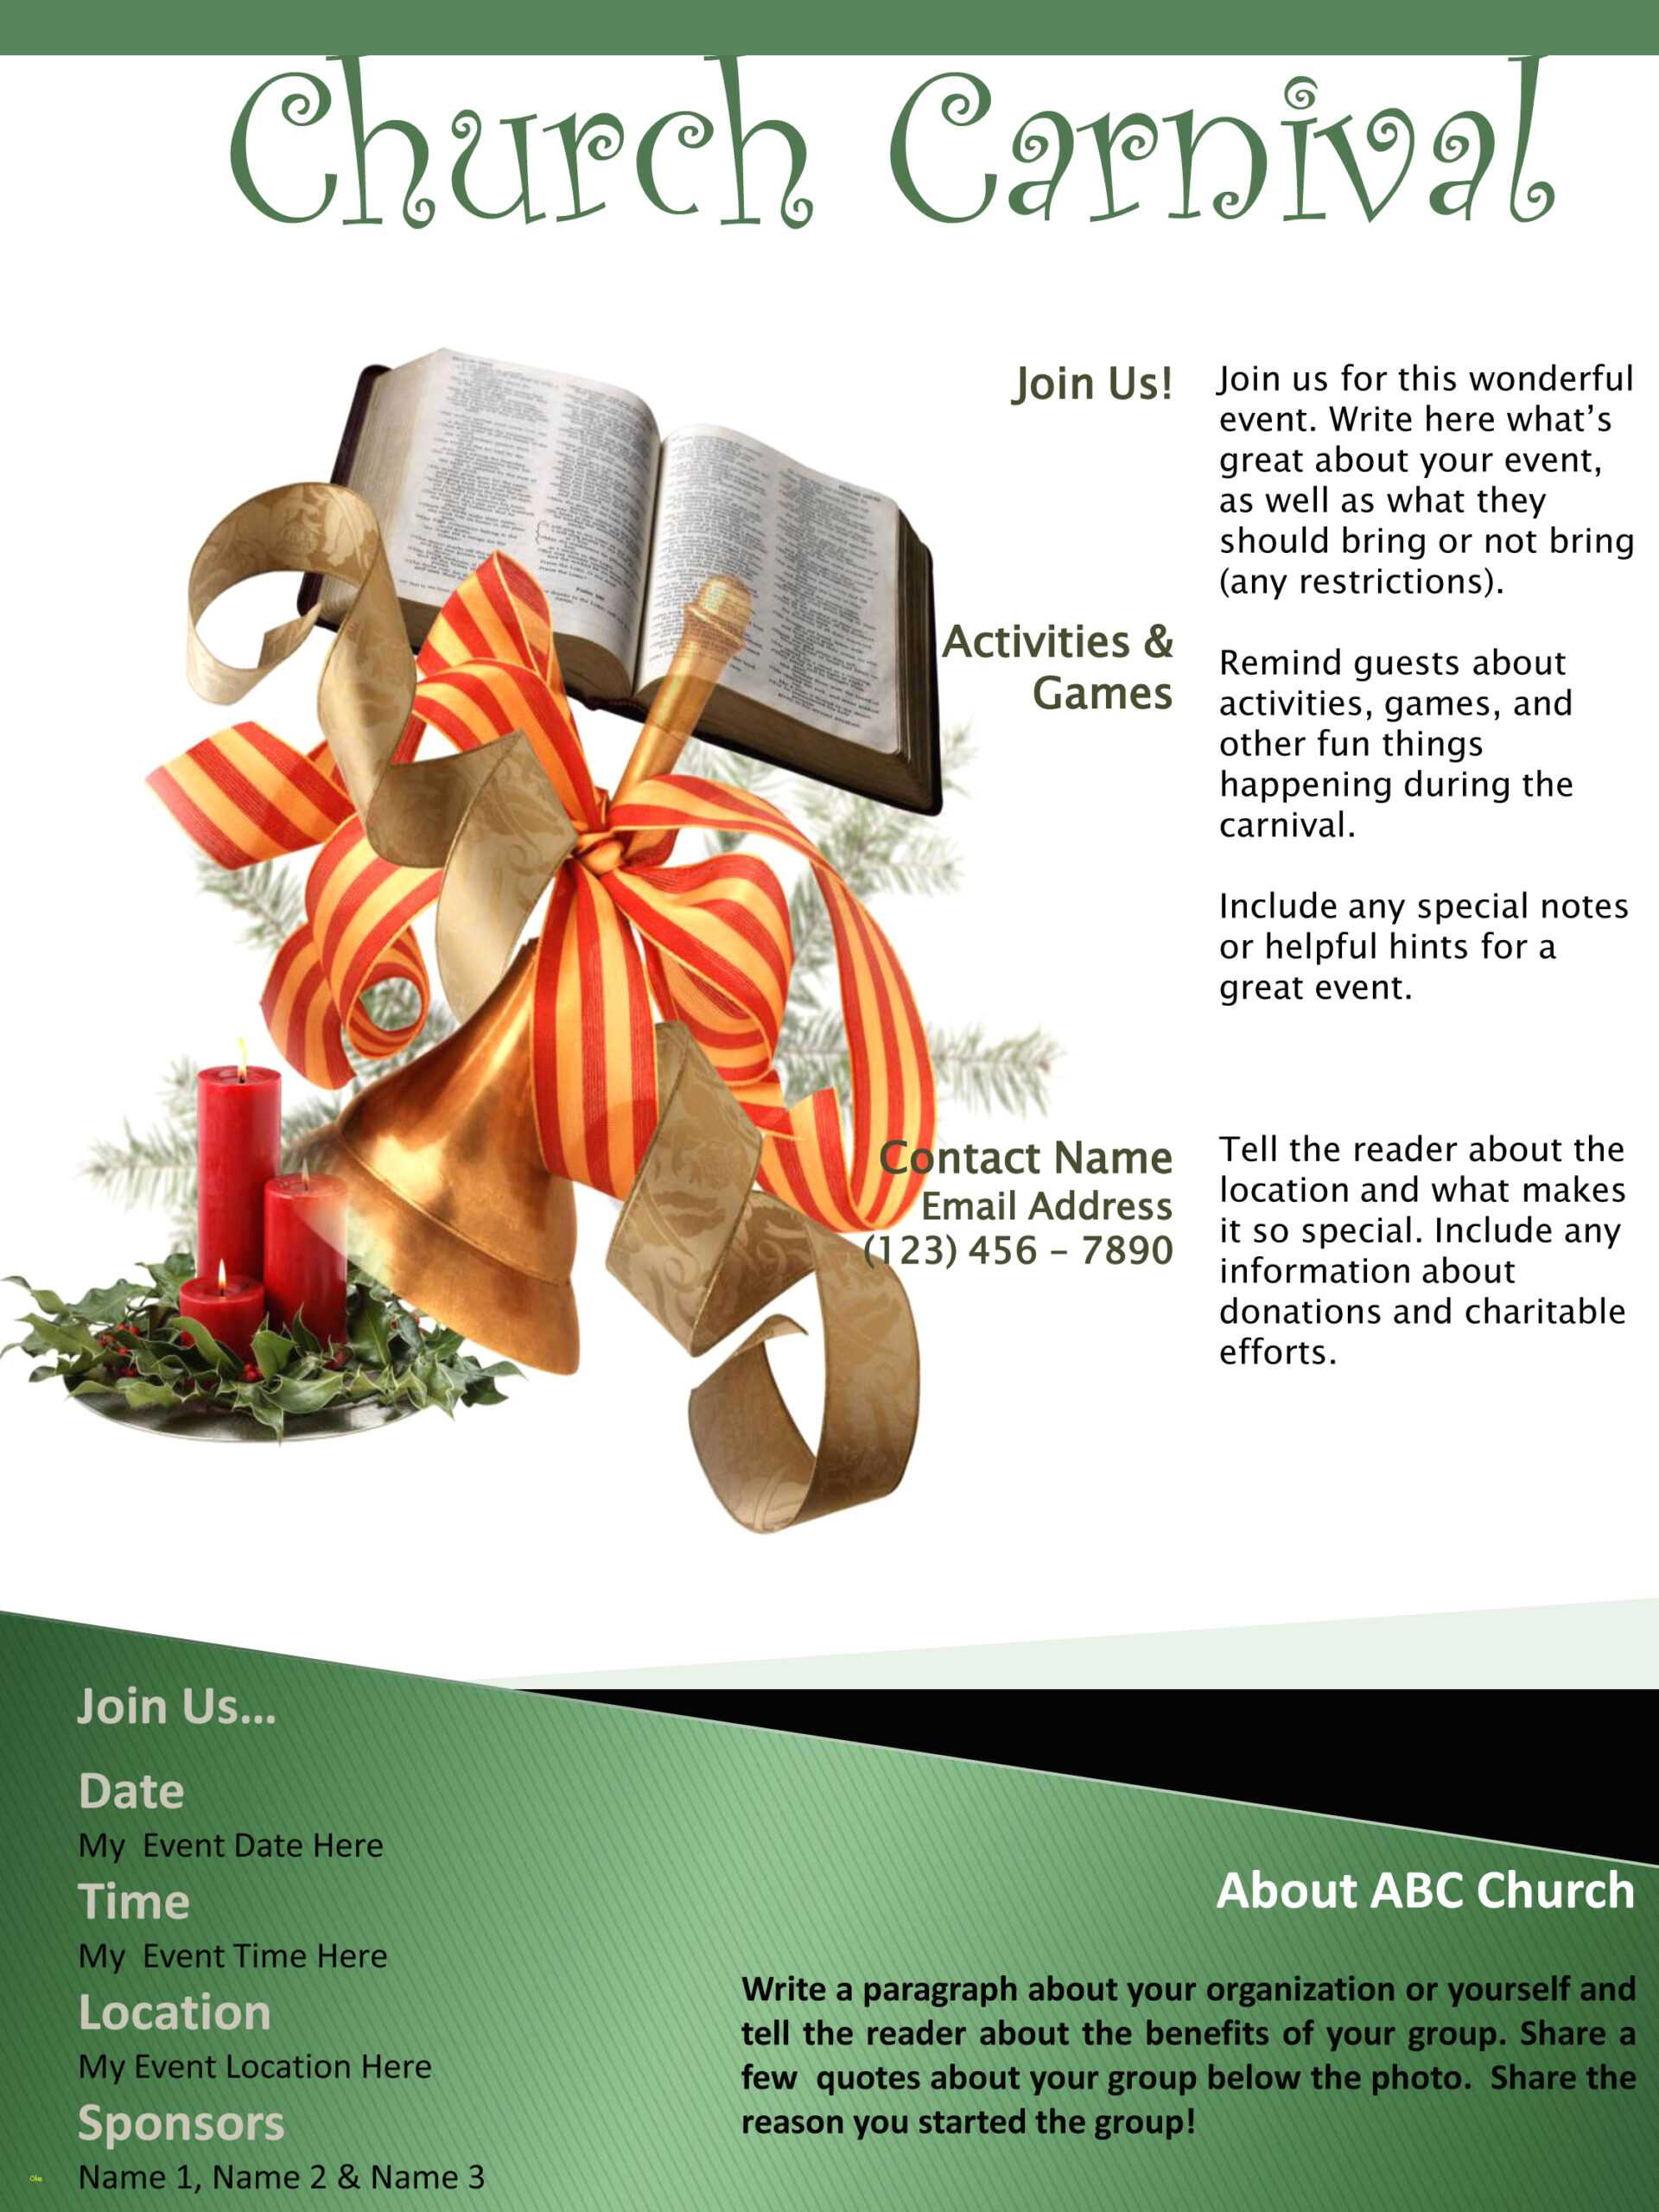 12 13 Microsoft Office Flyer Vorlagen | Ithacar Pertaining To Free Church Brochure Templates For Microsoft Word